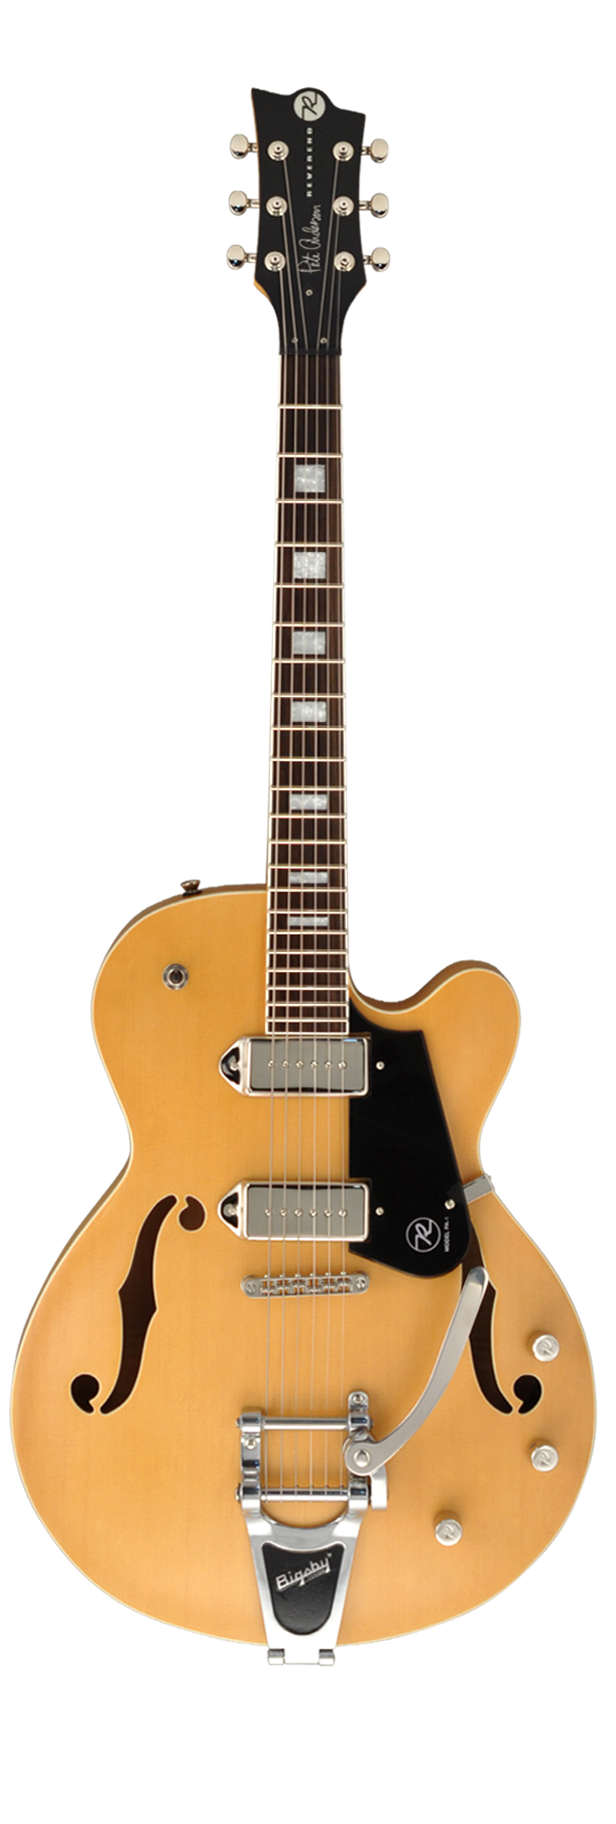 Archtop Guitar PNG Images HD